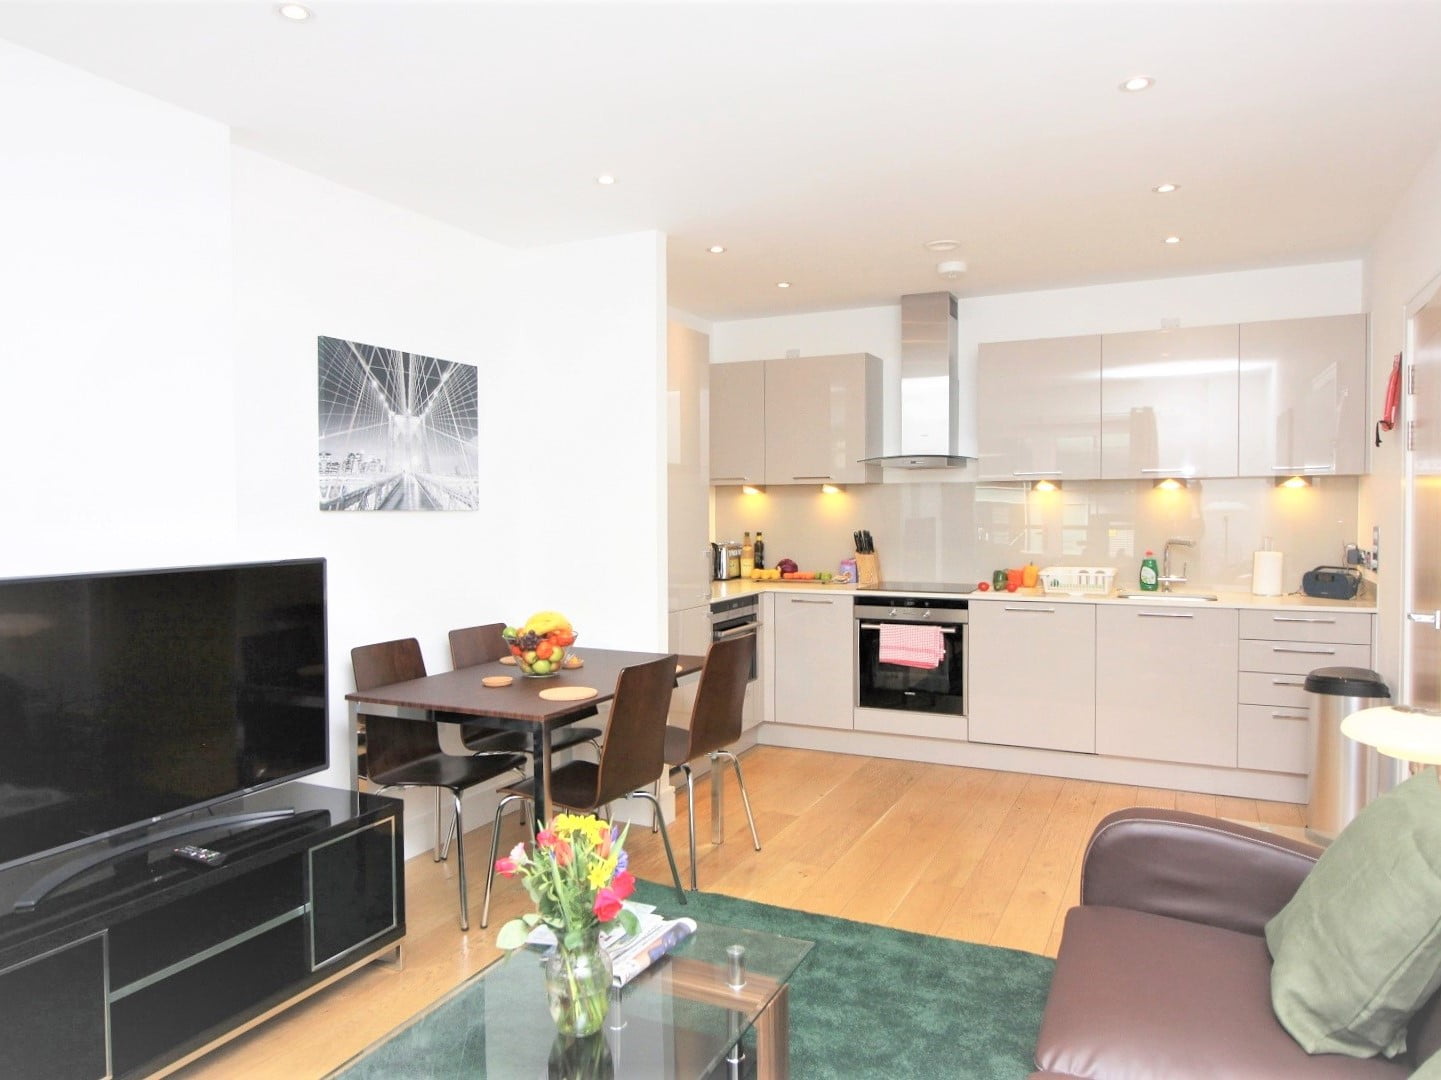 West London Serviced Apartments - Skerne Road Free Wifi Balcony Parking Apartments - Urban Stay